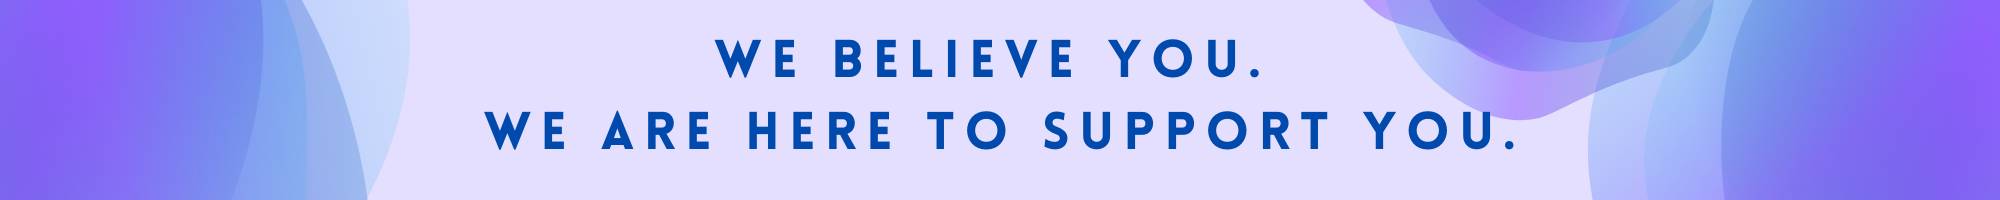 We Believe You. We Are Here to Support You.